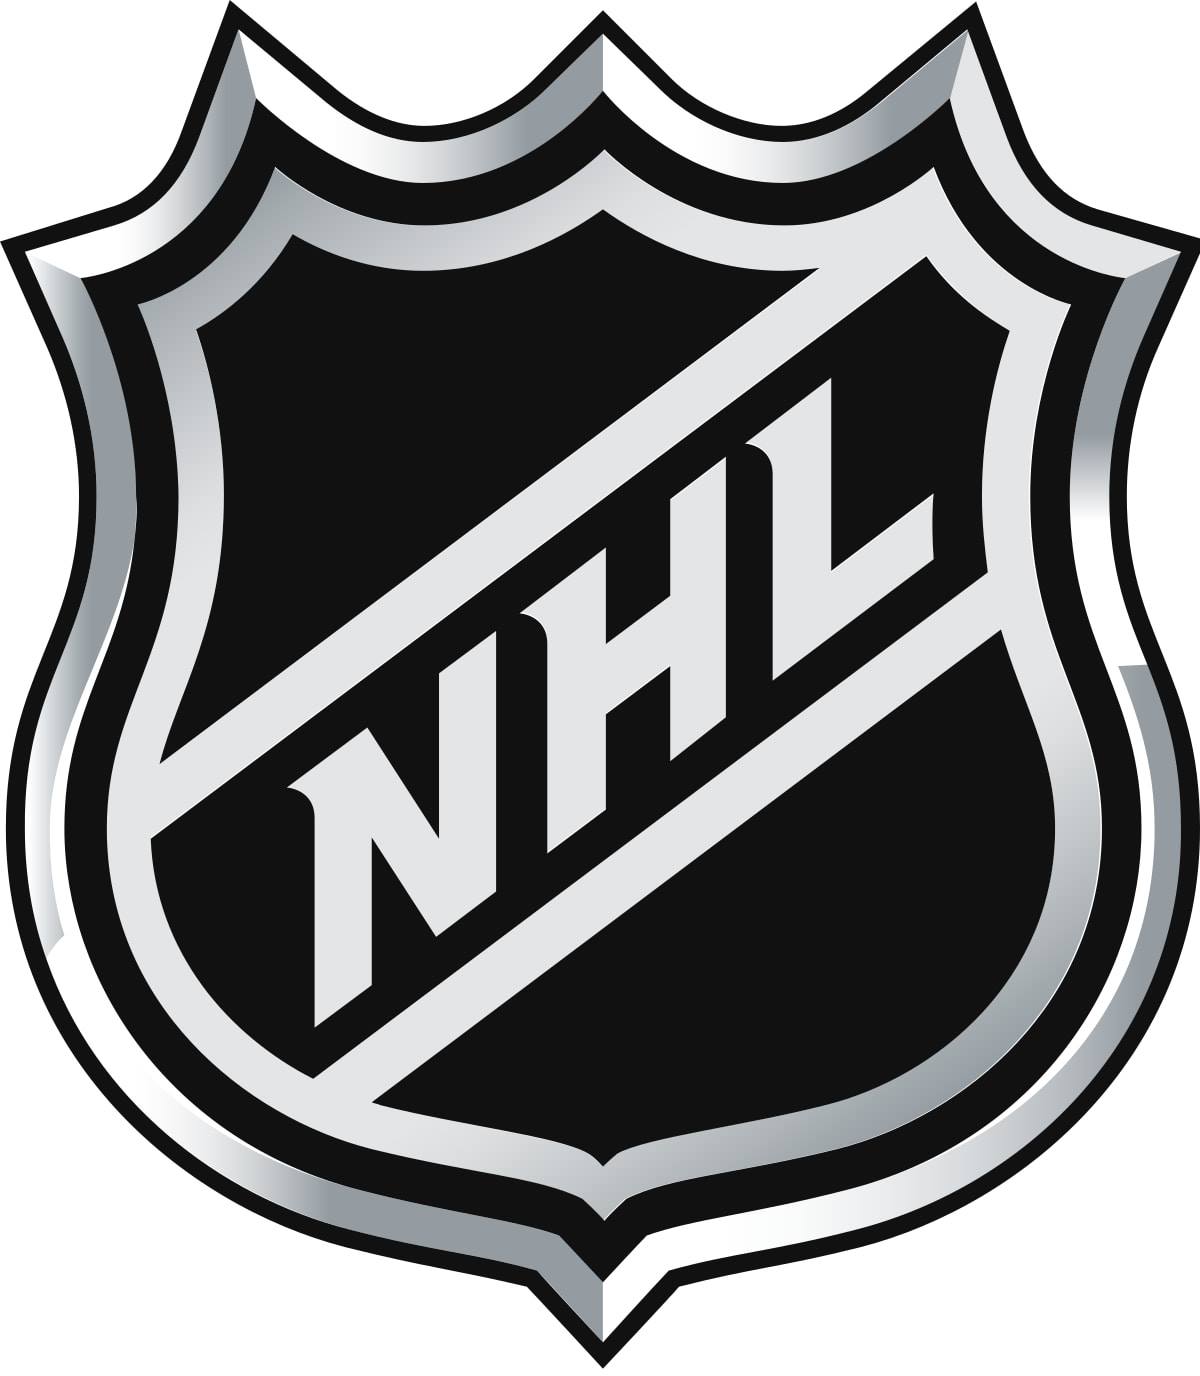 The WBHF cooperation with NHL an China Hockey | WBDHF